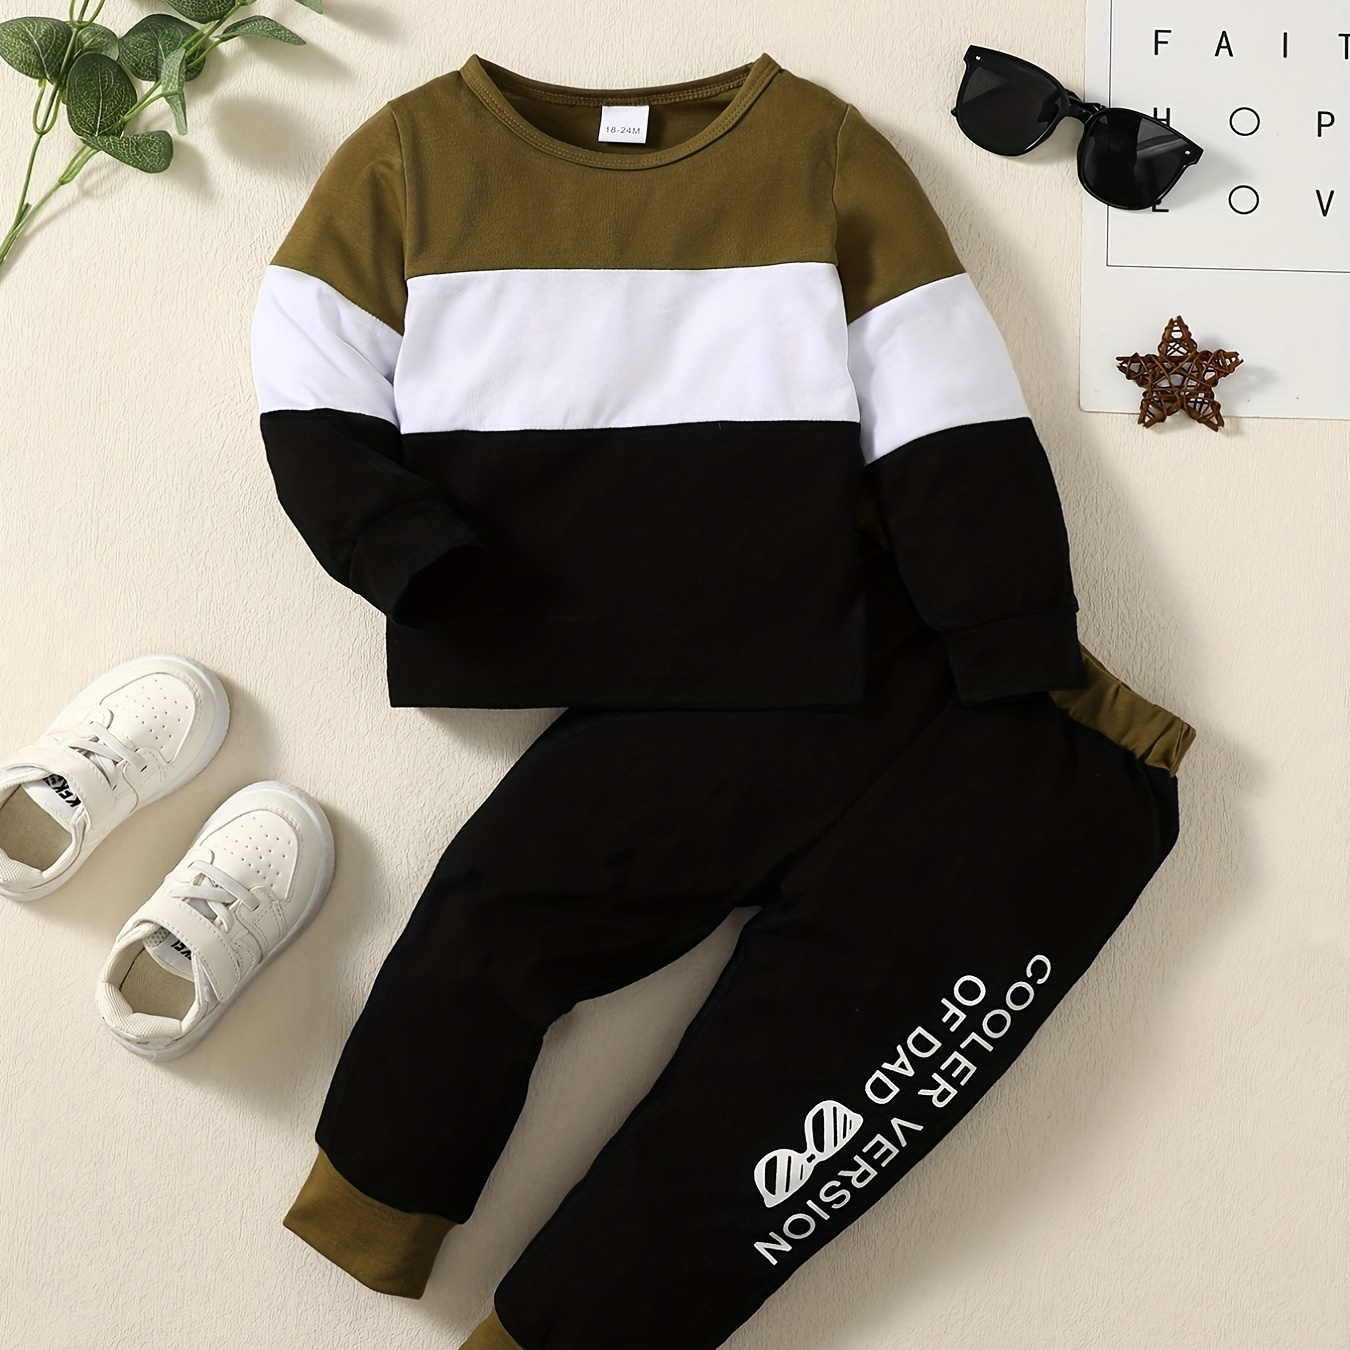 

2pcs Boys Spring Fall Thin Set, Contrast Color Long Sleeve Round Neck Sweatshirt & Elastic Waist Sweatpants Letter Print Sports Casual Thin Clothes For Autumn